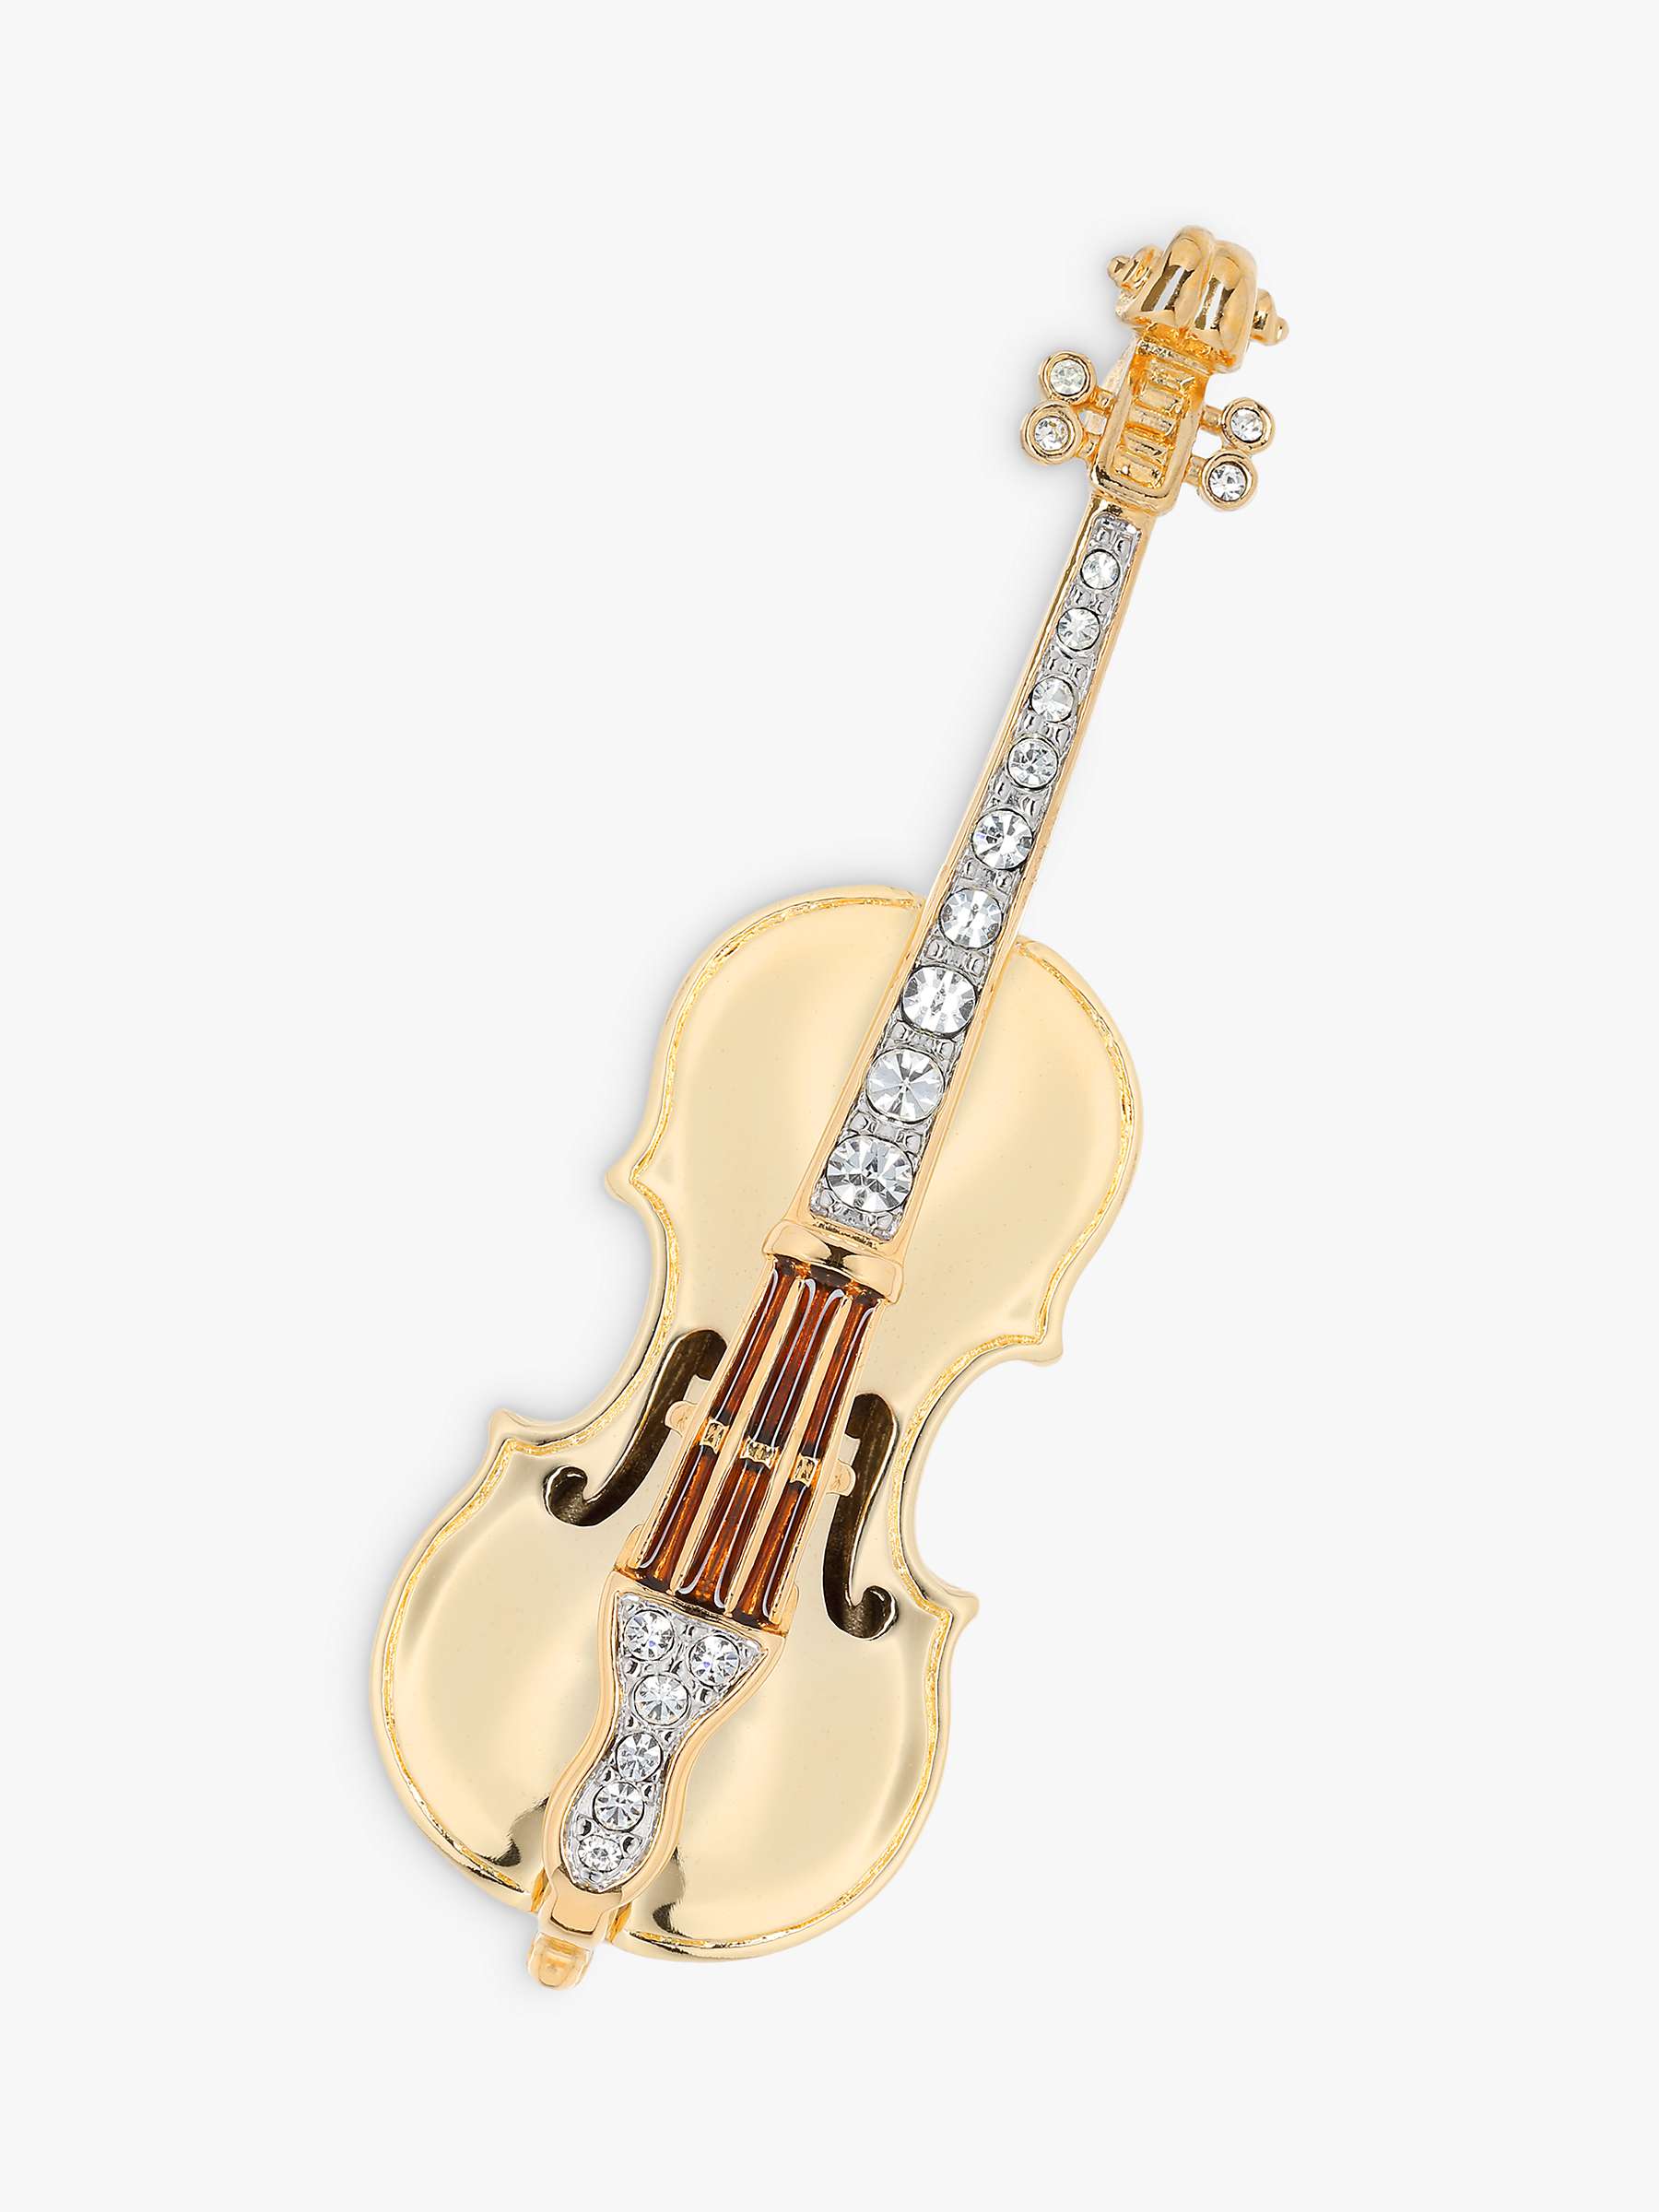 Buy Eclectica Vintage 22ct Gold Plated Swarovski Crystal Cello Brooch, Dated Circa 1980s Online at johnlewis.com